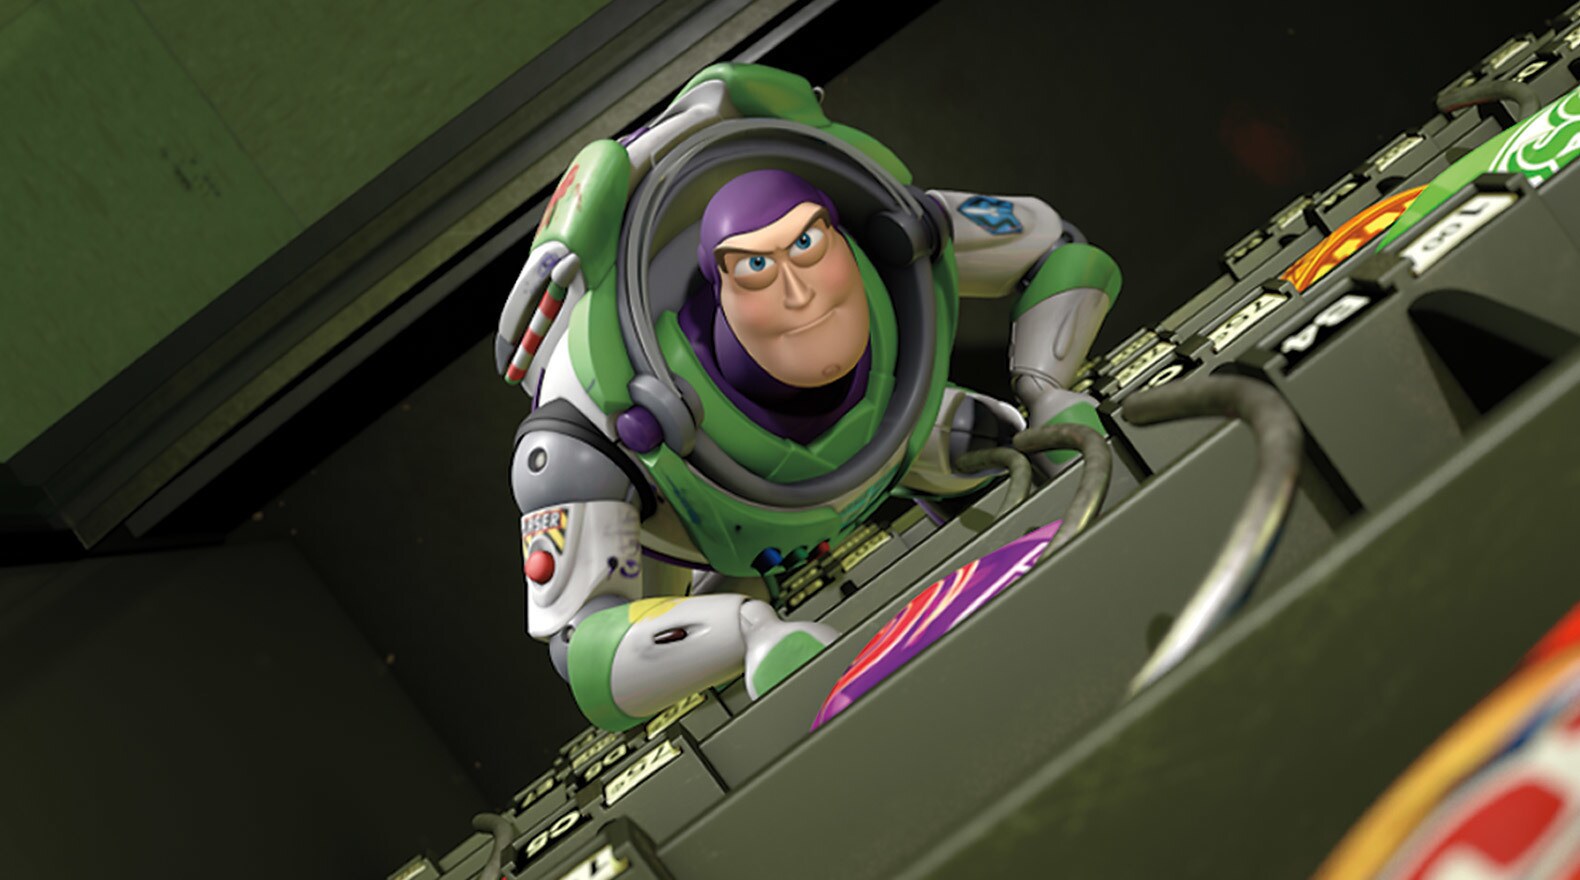 Buzz climbs to the top while inside a vending machine.